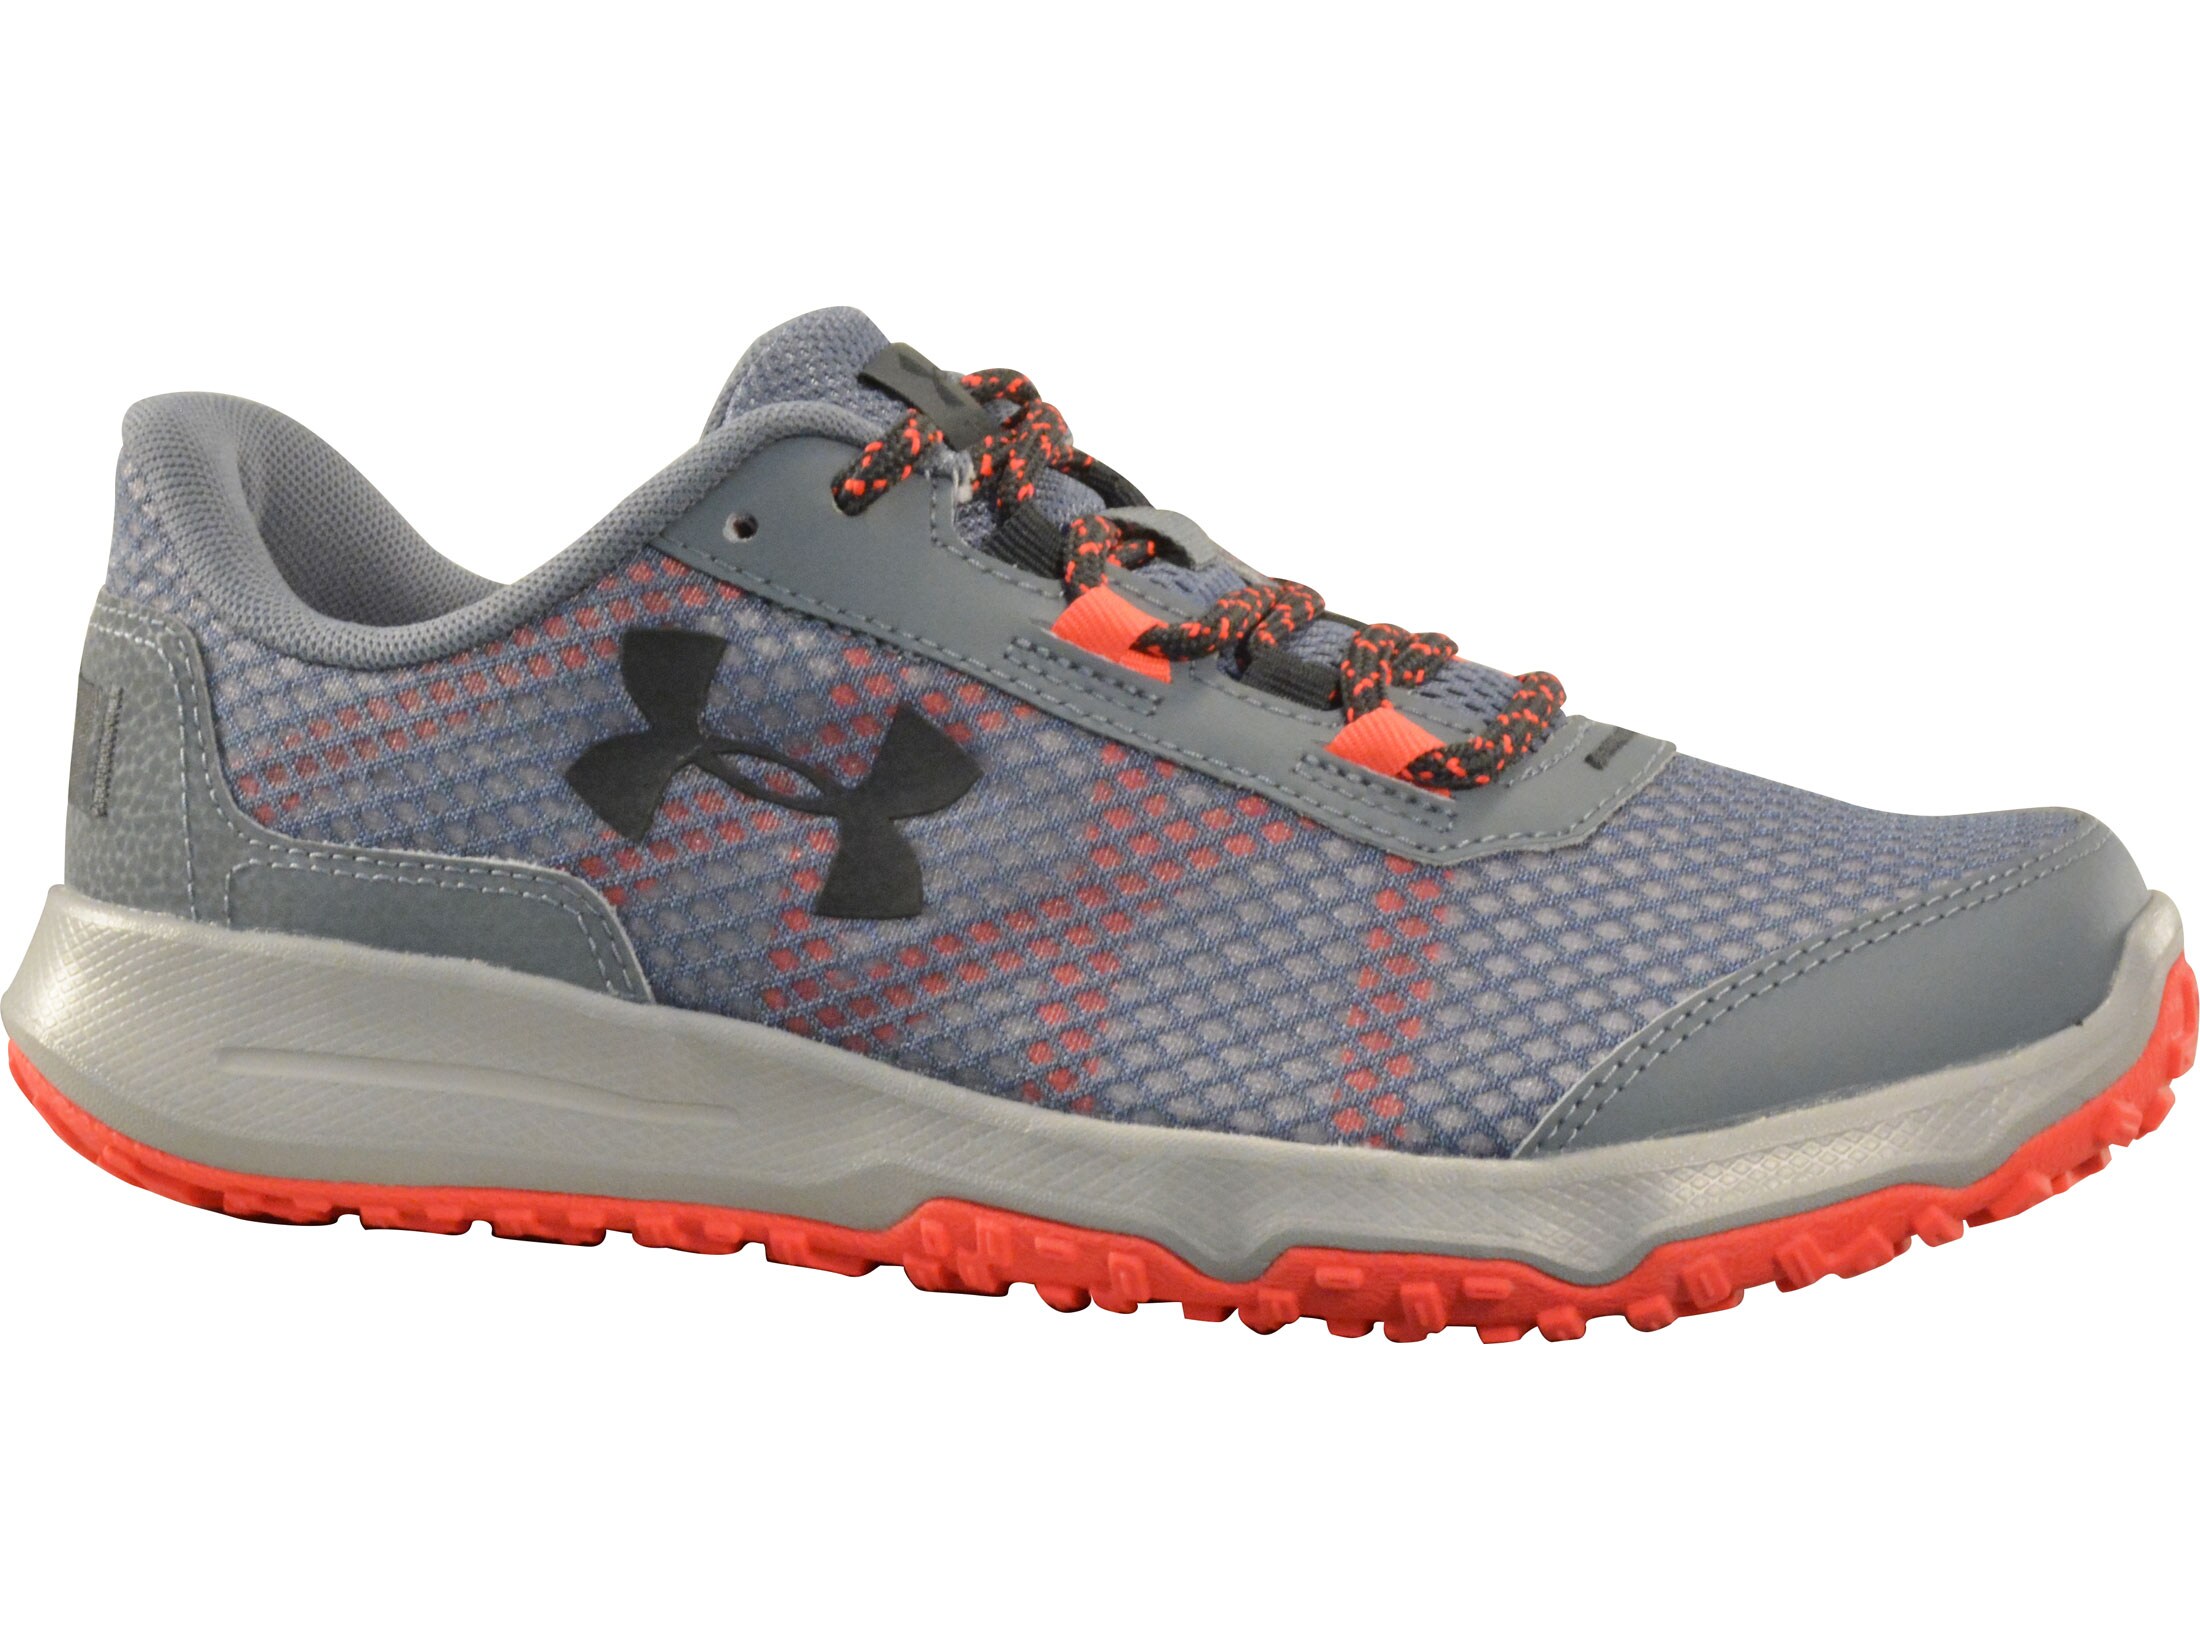 Under Armour UA Toccoa Low 4 Hiking Shoes Synthetic Gravel/Neo Pulse